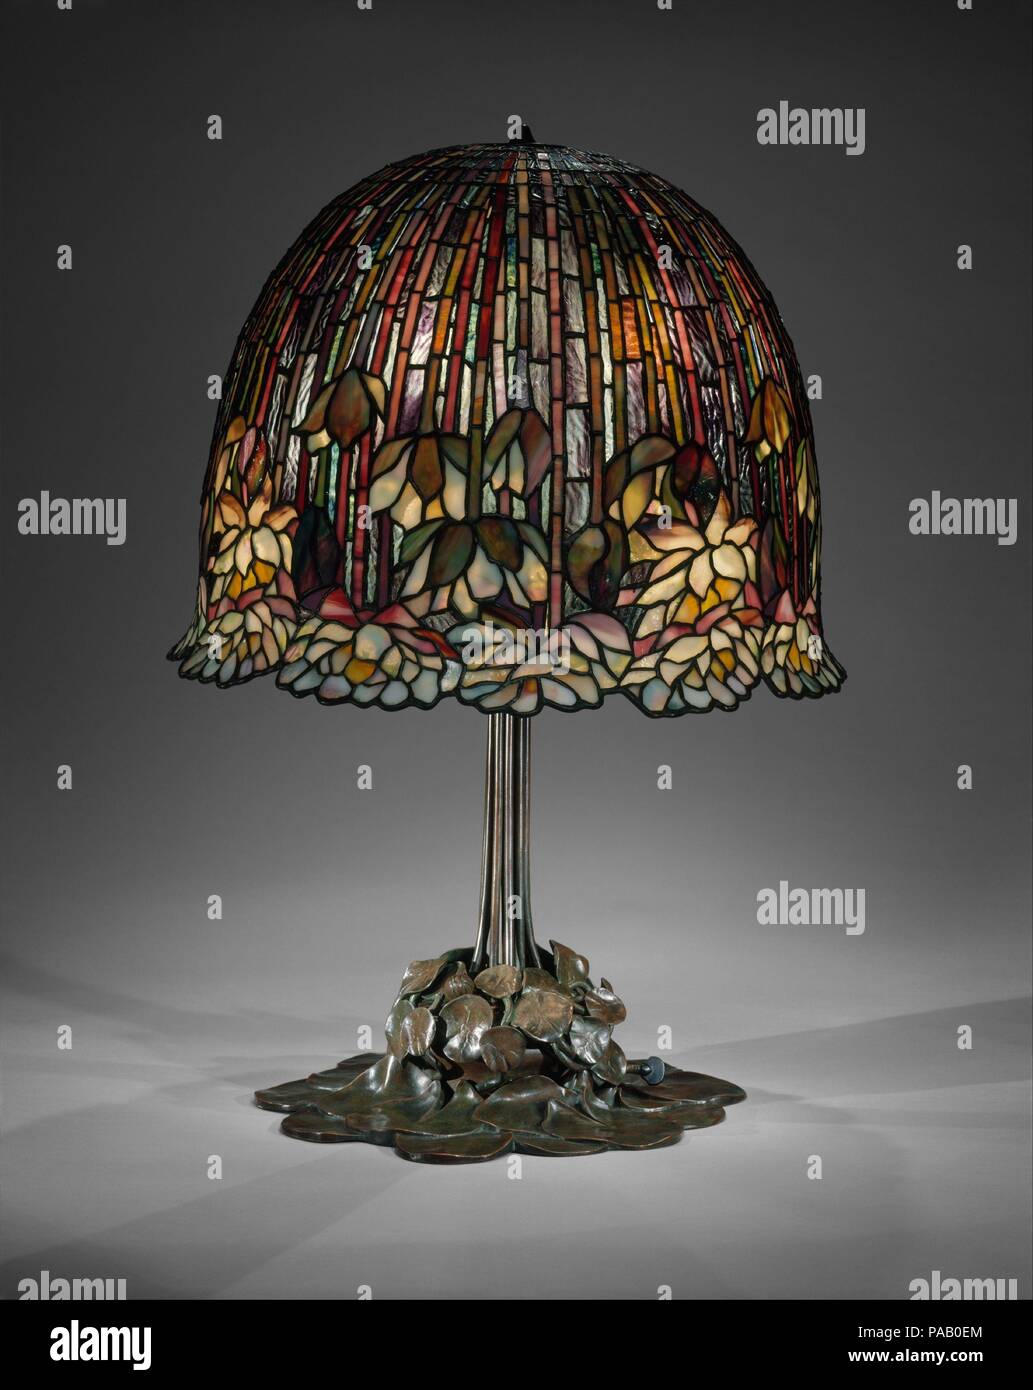 Lamp. Culture: American. Designer: Designed by Louis Comfort Tiffany (American, New York 1848-1933 New York). Dimensions: Base: H. 26 1/2 in. (67.3 cm); Diam. 14 5/8 in. (37.1 cm)  Shade: H. 14 5/8 in. (37.1 cm). Maker: Tiffany Studios (1902-32). Date: 1904-15.  This water-lily table lamp is one of Tiffany's most successfully executed designs for his firm's well-known leaded-glass products. The overall organic character of the lamp is emphasized throughout the piece in its details. The bronze support replicates broad, flat lily pads clustered around a base, out of which rise attenuated climbin Stock Photo